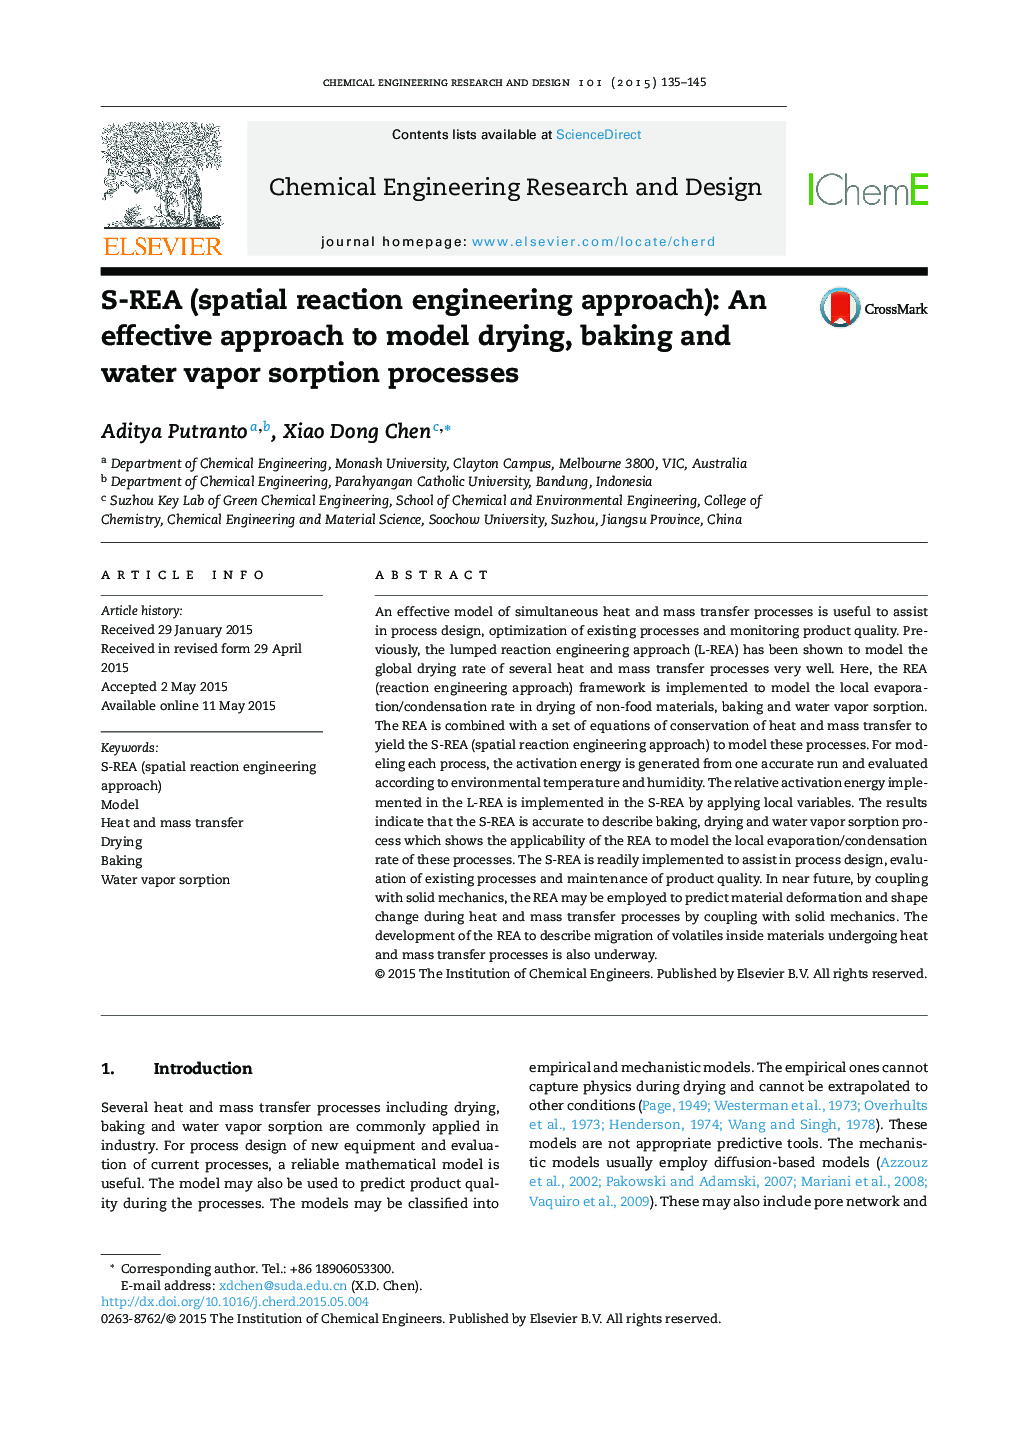 S-REA (spatial reaction engineering approach): An effective approach to model drying, baking and water vapor sorption processes